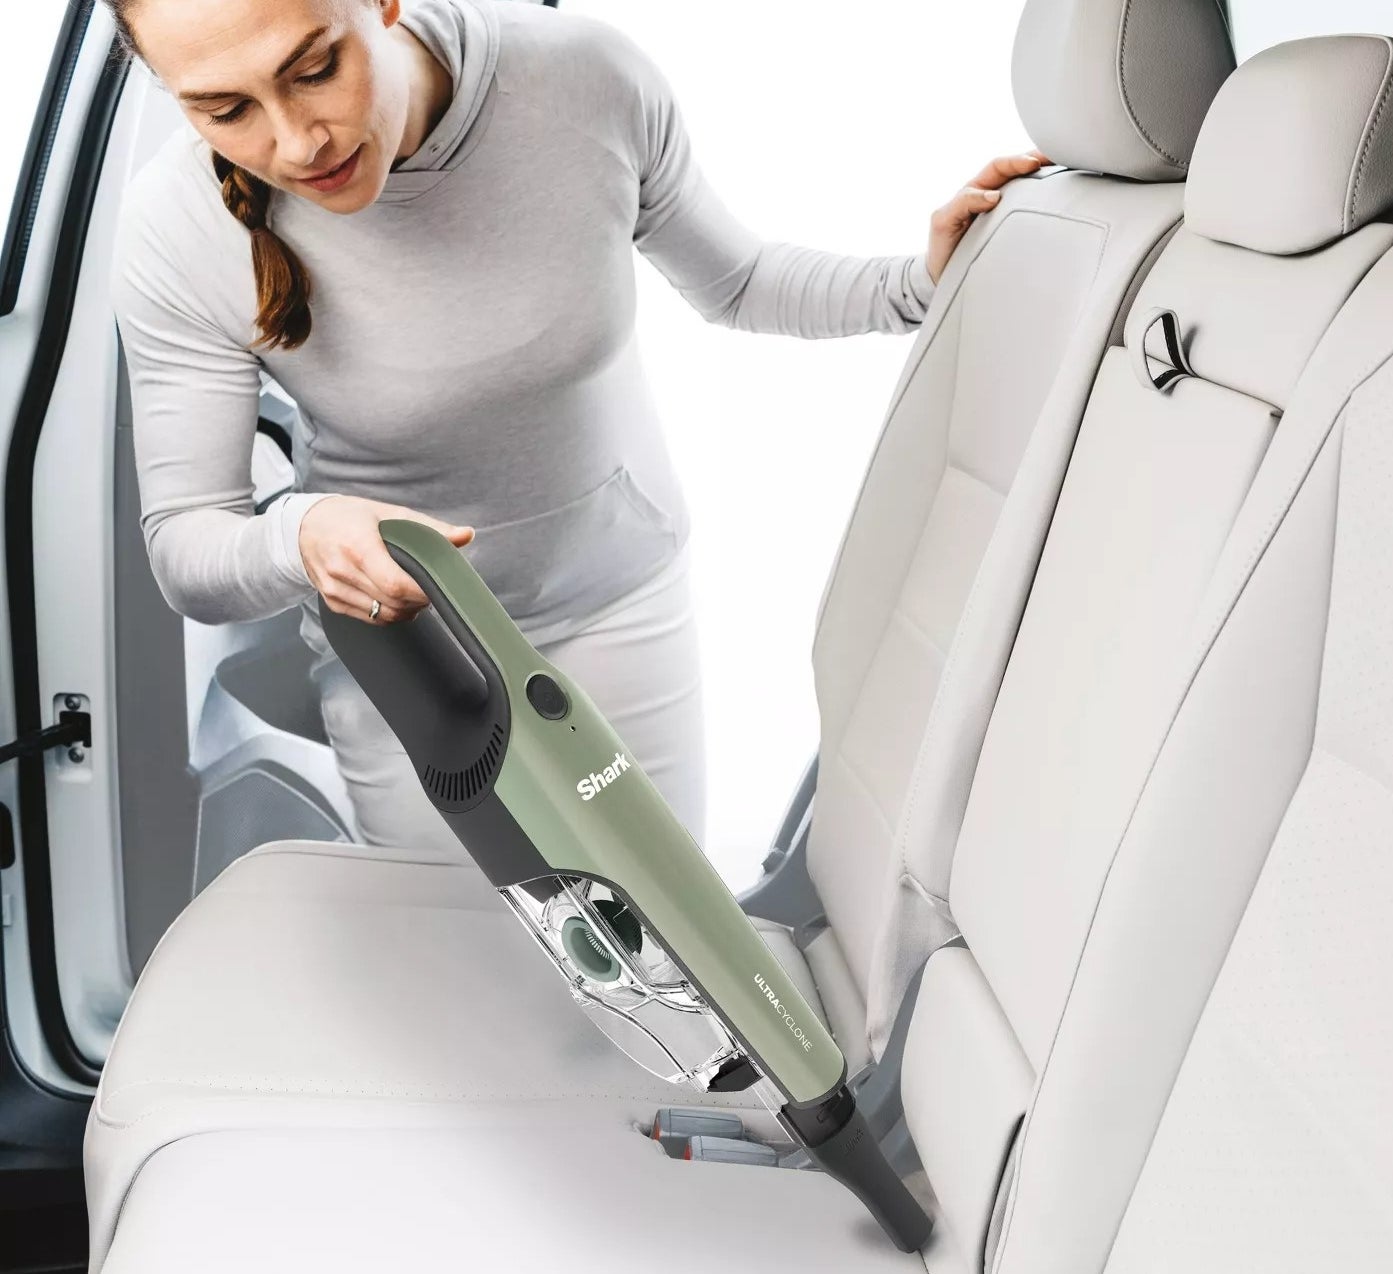 The vacuum being used on car seats